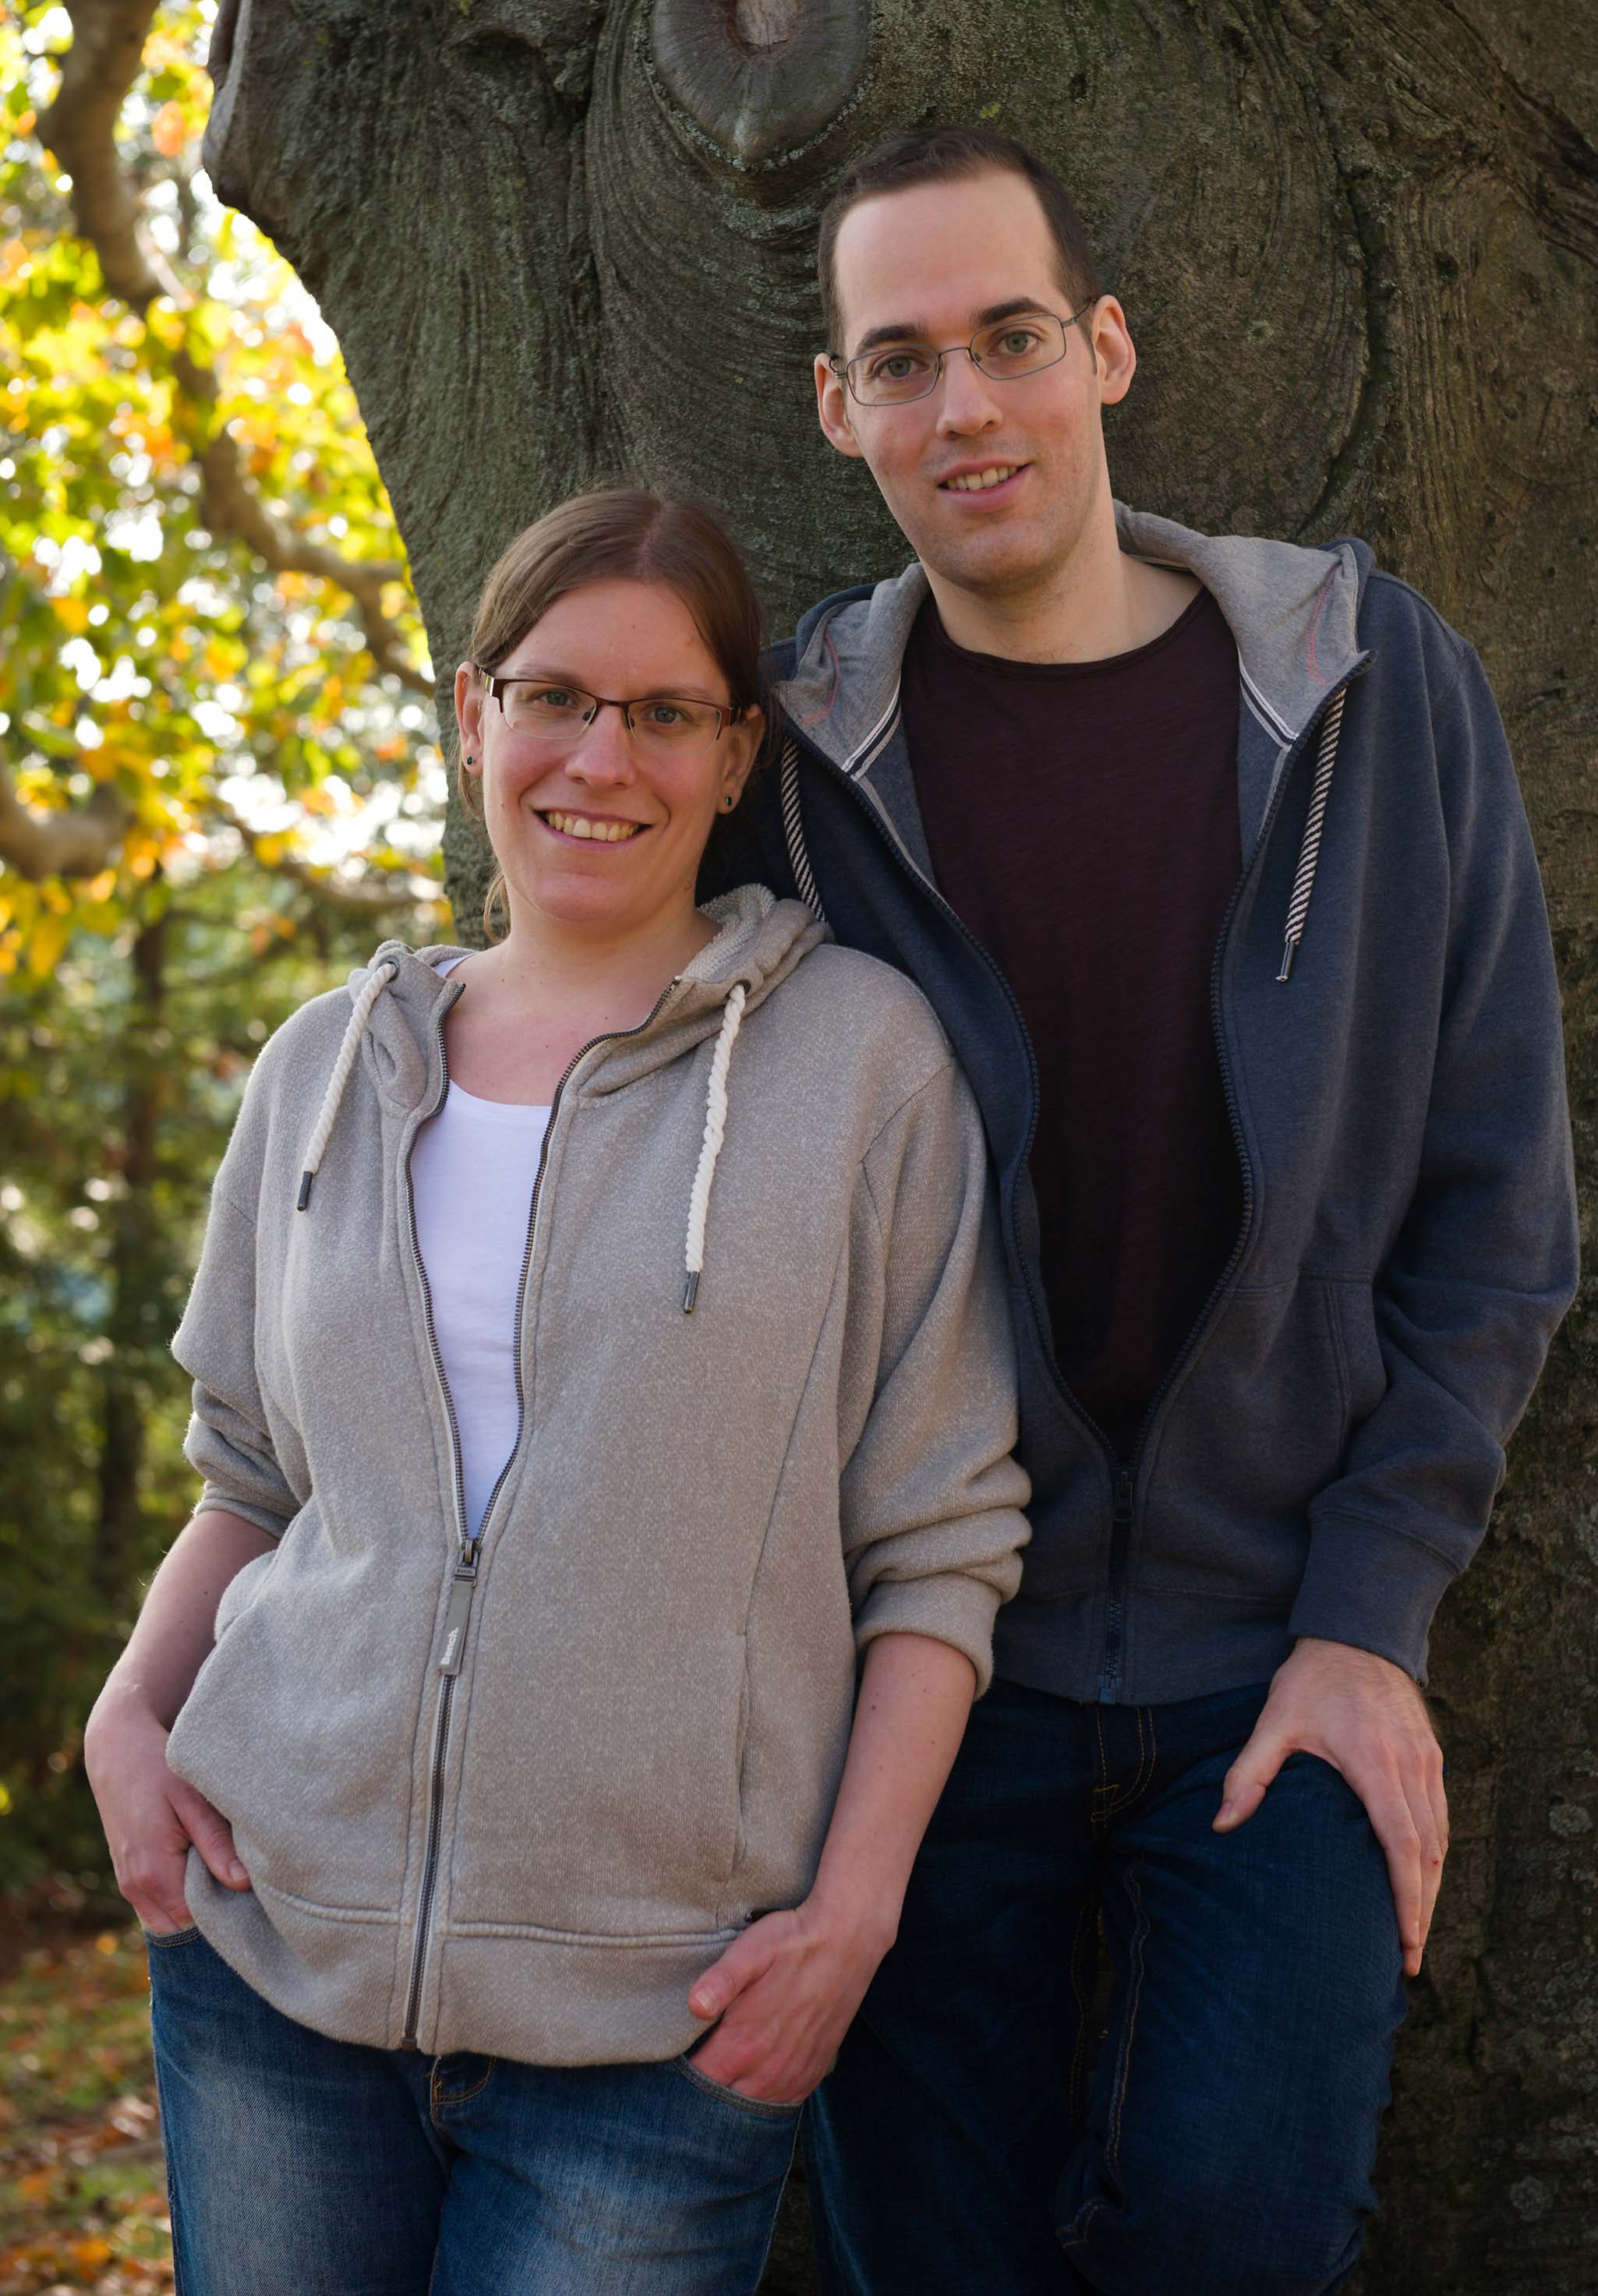 Thomas and Ann-Katrin in casual outfit lean on a tree